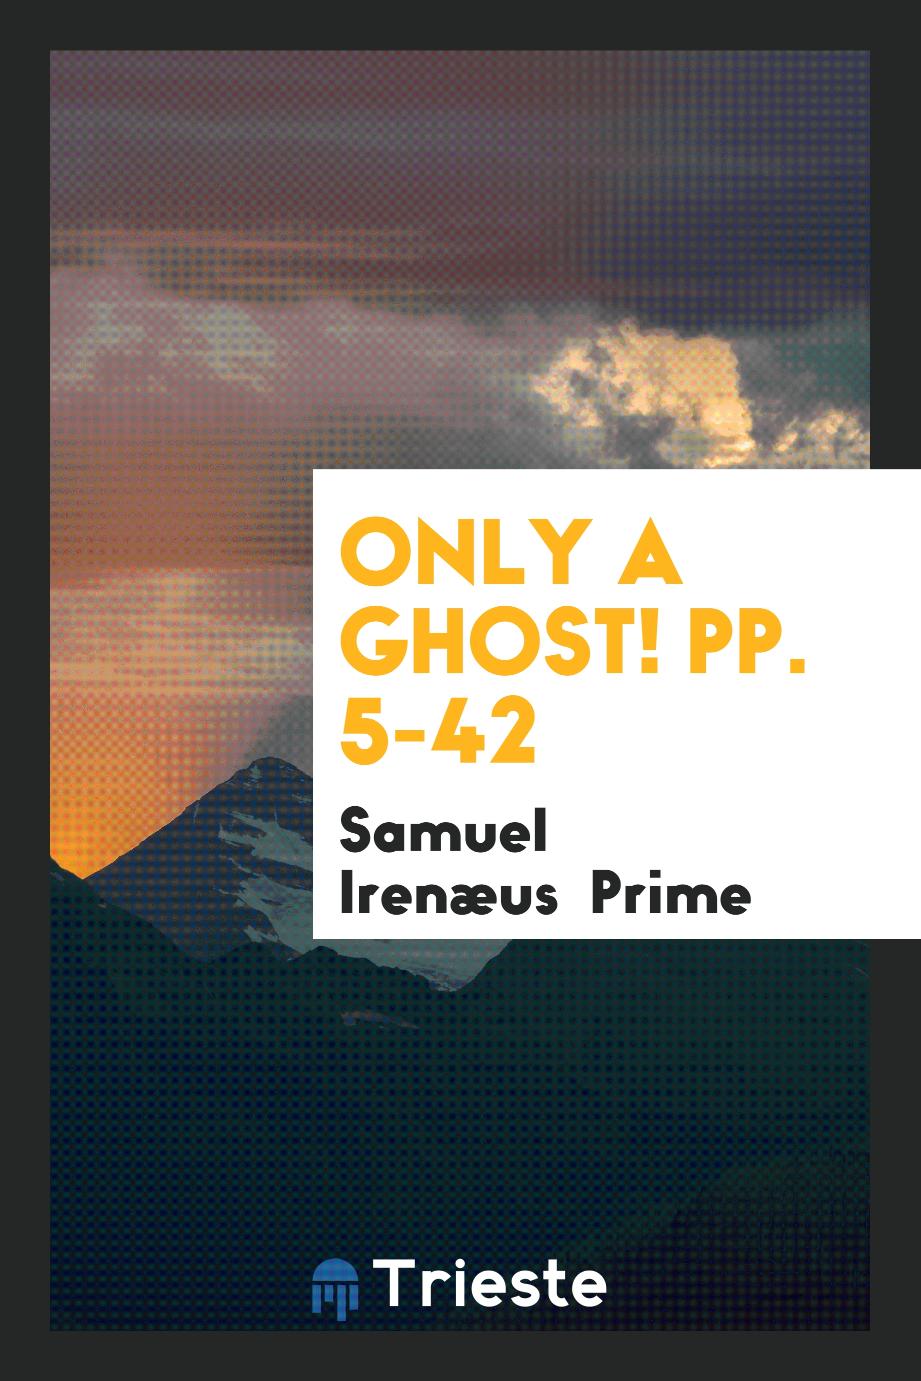 Only a Ghost! pp. 5-42